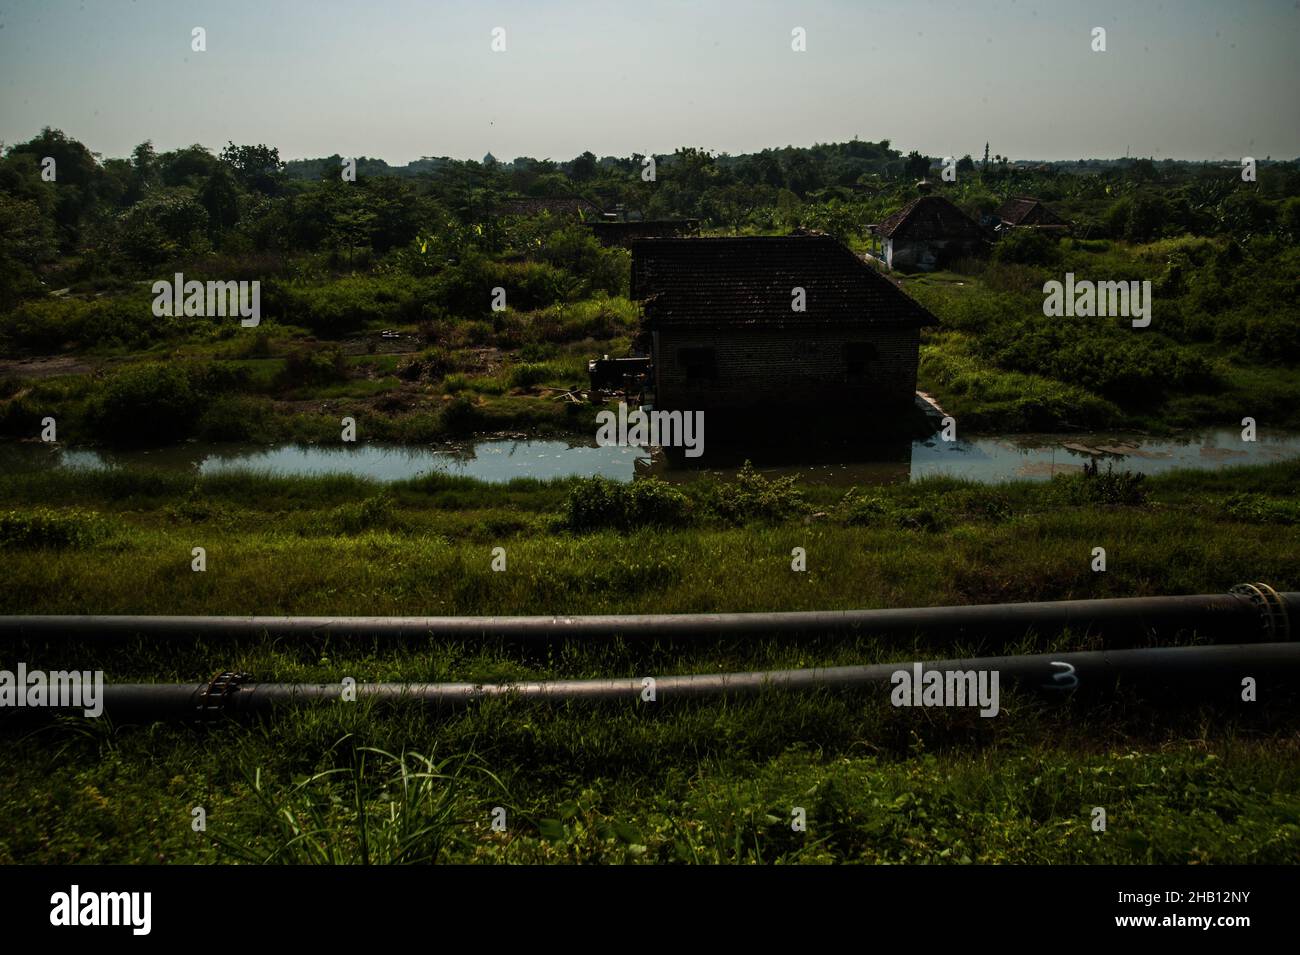 Photo dated October 19, 2016 - The debris home from the past settlement seen burried amid the Lapindo volcanic mudflow disaster area in Sidoarjo, East Java province, Indonesia. Since May 29, 2006 until now, as 1,143.3 hectares area land has changes be the natural territory of the world's largest mud volcano were belches water, oil, methane gas and mud everytime. The geological activity is a contributor to methane gas emissions amount as the largest natural gas manifestation on earth, based on the study report published in the journal Scientific Reports on February 18, 2021. Photo by Sutanta Ad Stock Photo